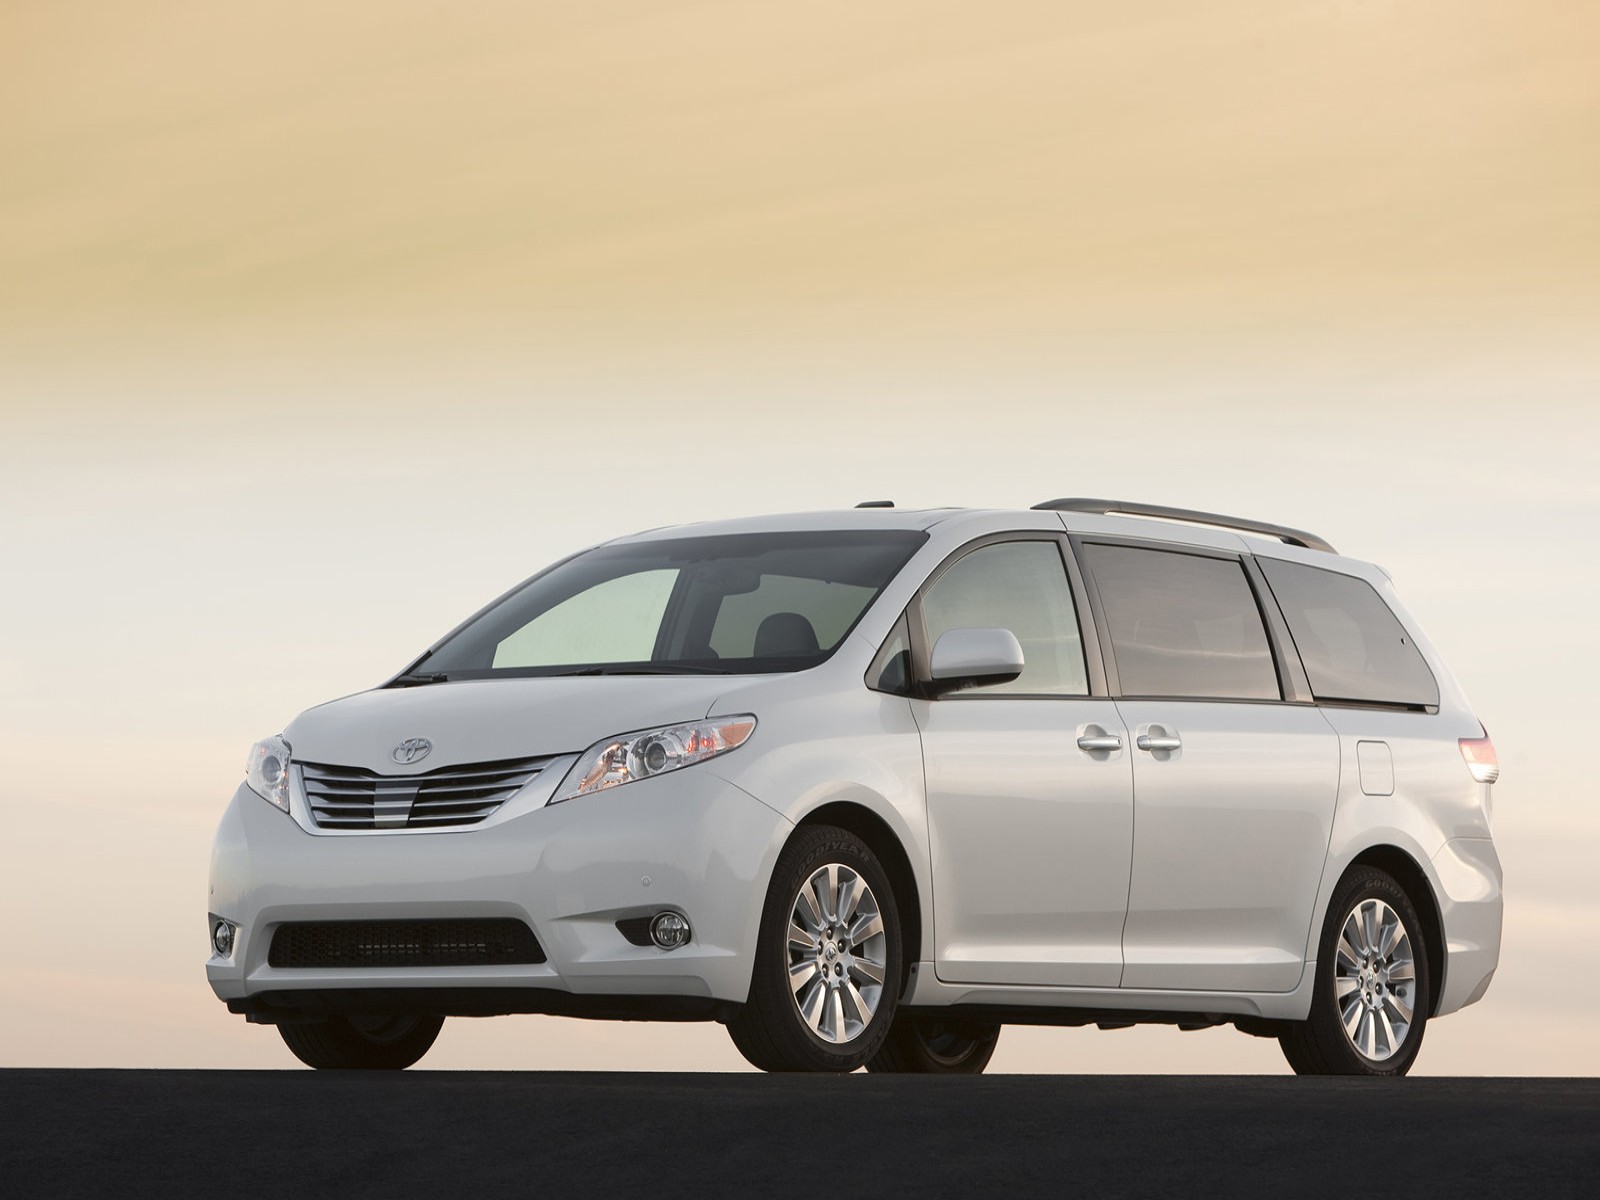 Toyota Sienna 2011 - Luxury and Fast Cars 2011 Toyota Sienna Awd Towing Capacity